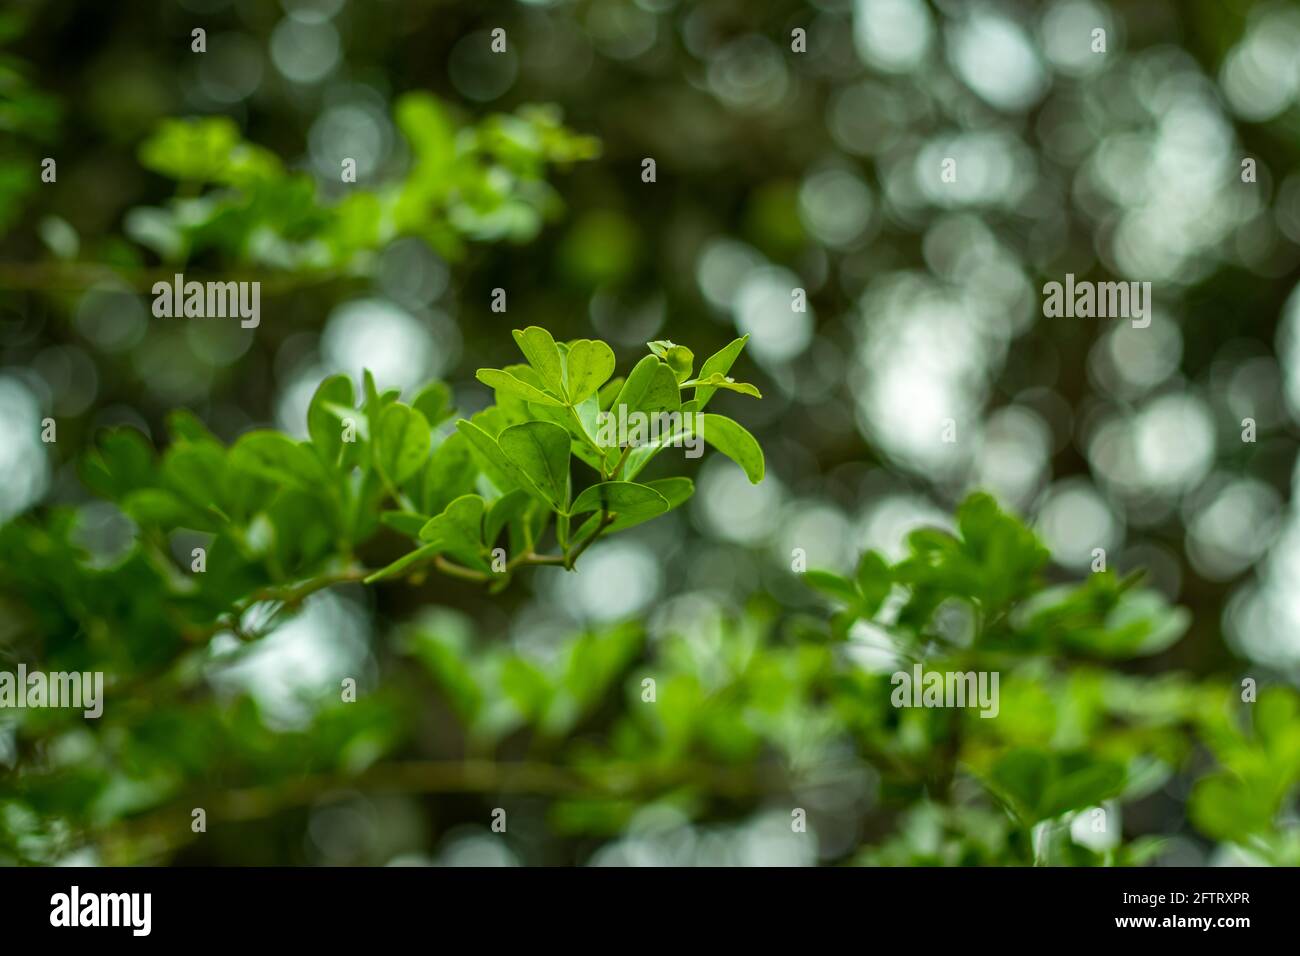 wood-apple and elephant-apple that green and small a bunch of stalks and leaves Stock Photo